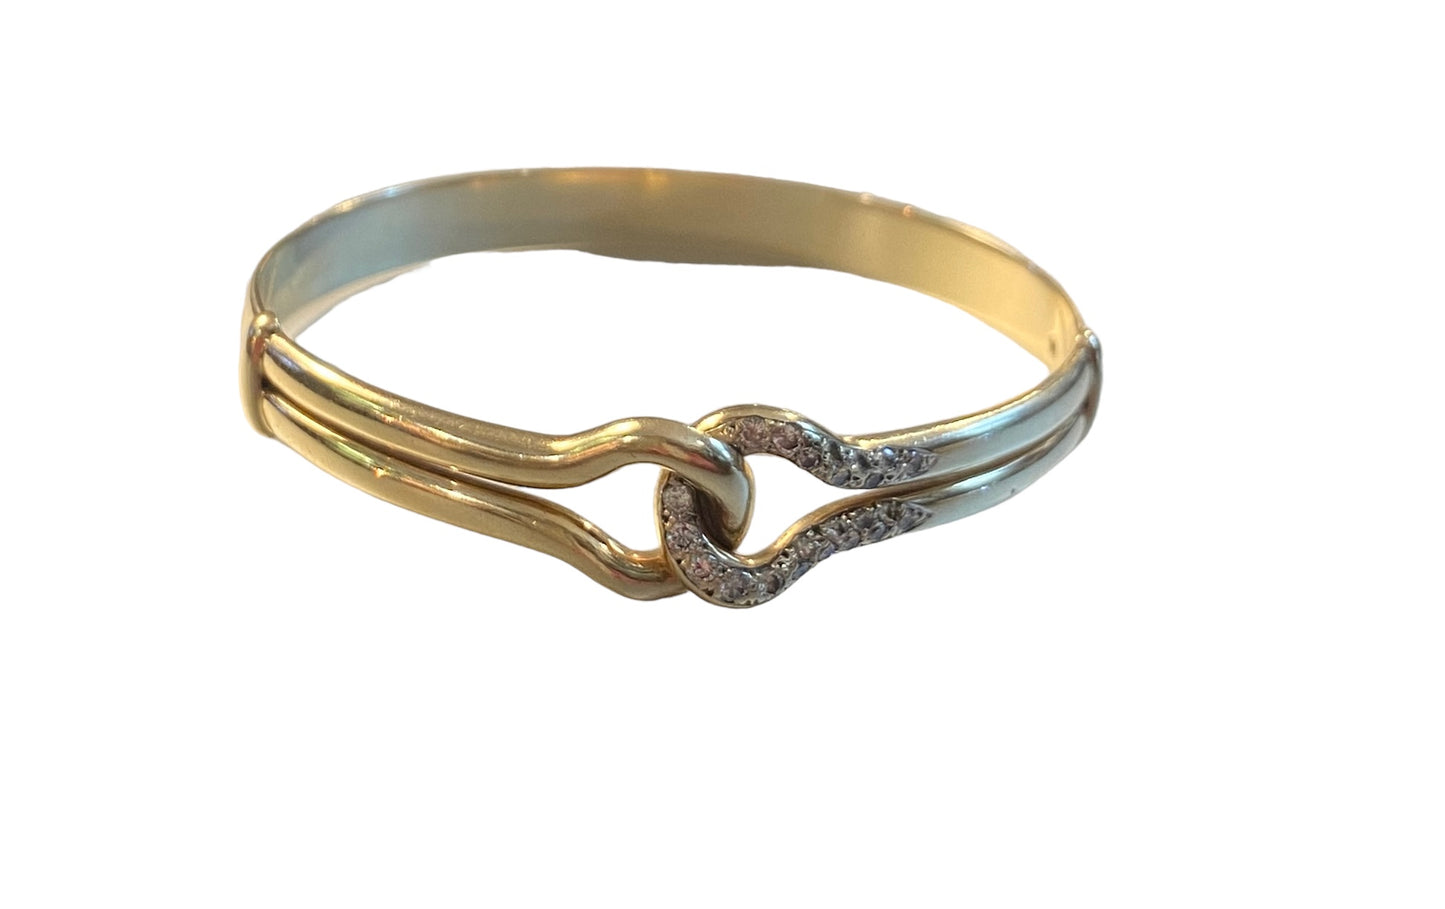 9ct vintage large bangle with diamonds and a love knot